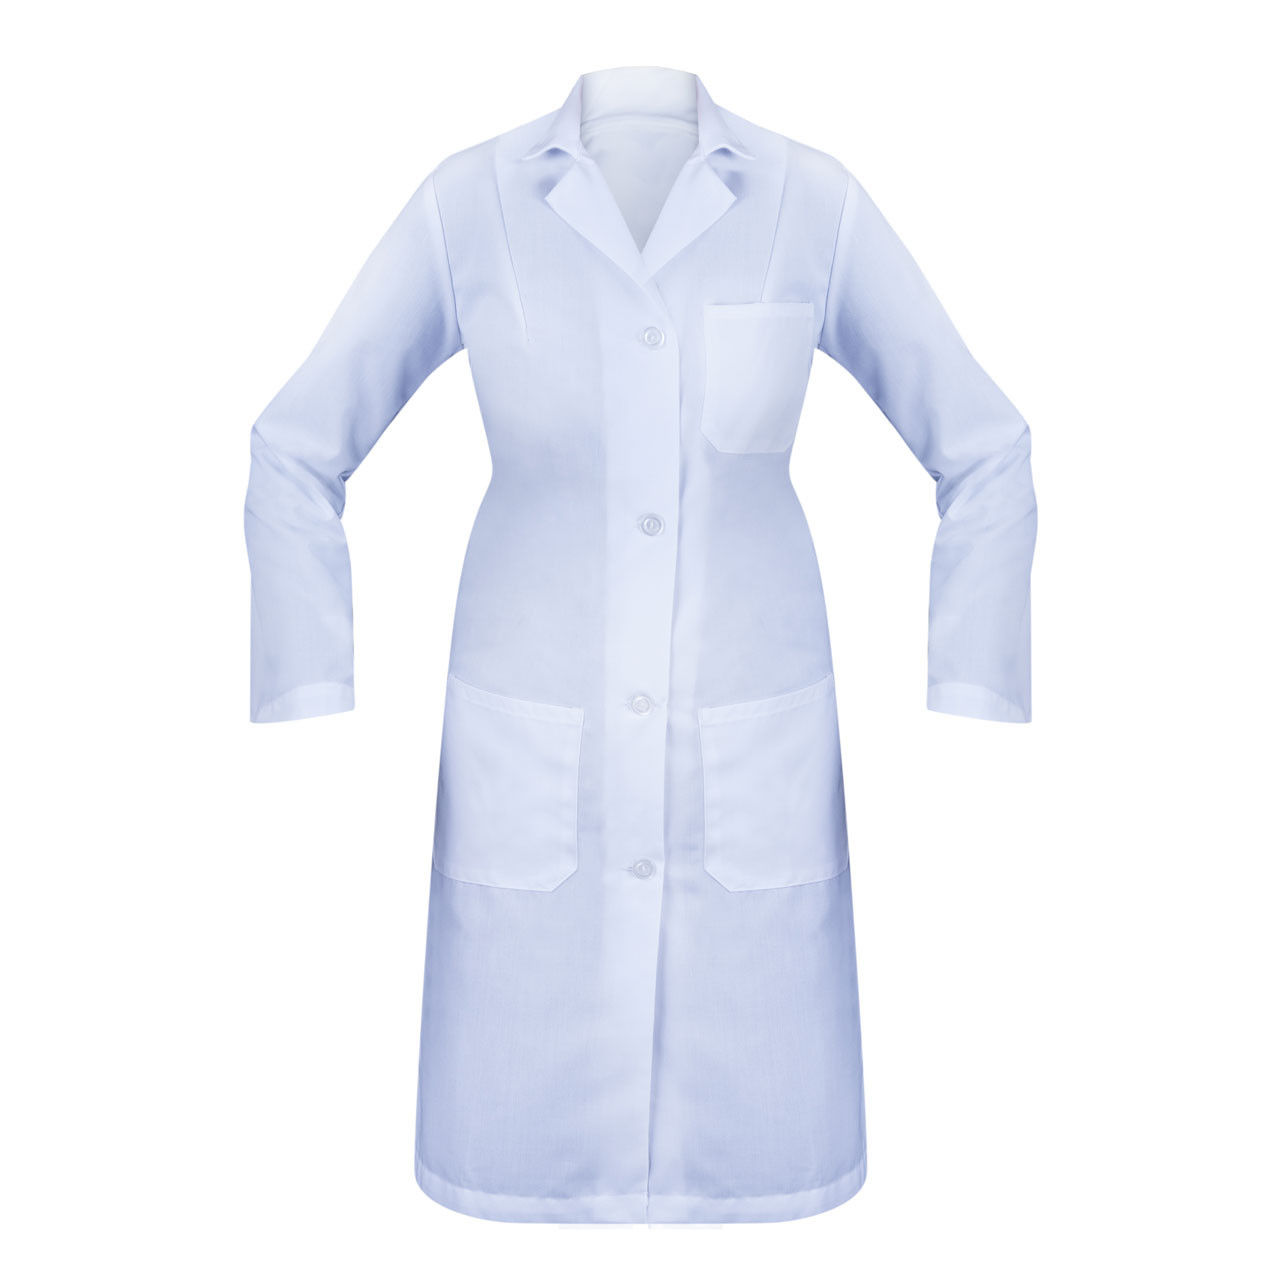 What kind of closure does the Female Lab Coat feature?